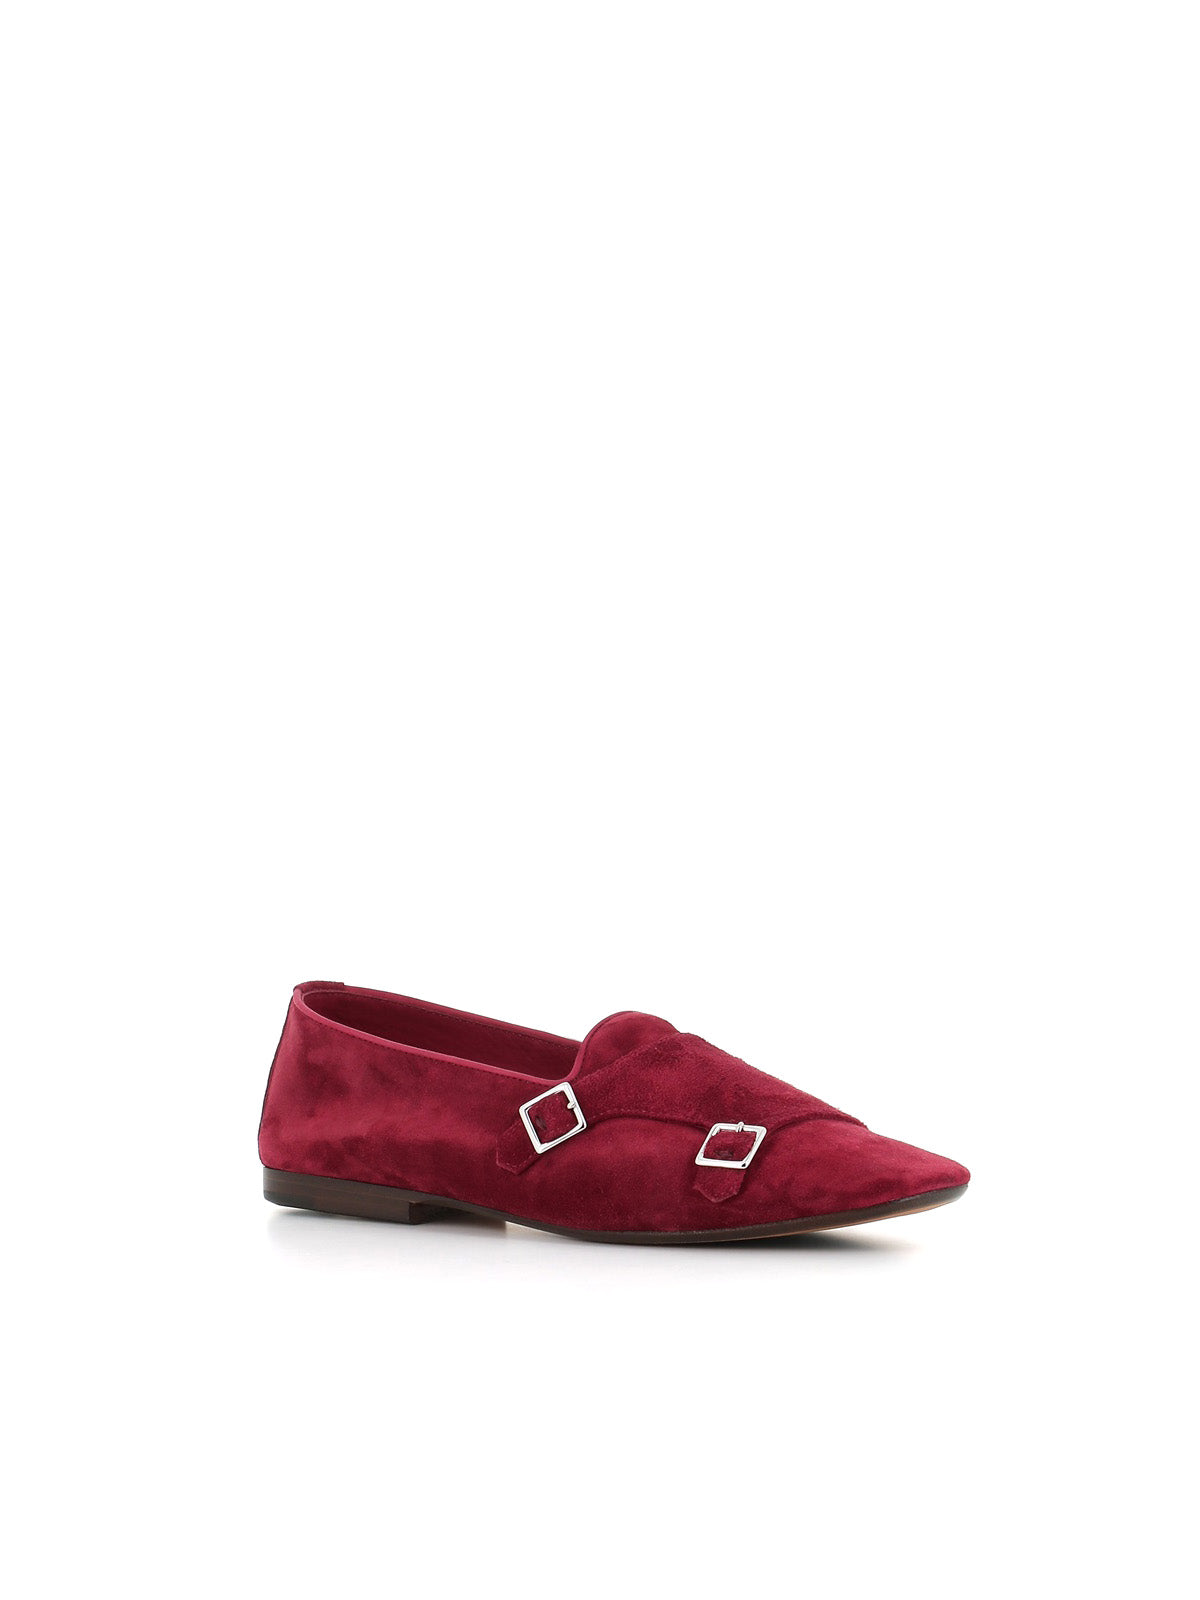  Buckle May.c.13 Henderson Baracco Donna Rosso - 3